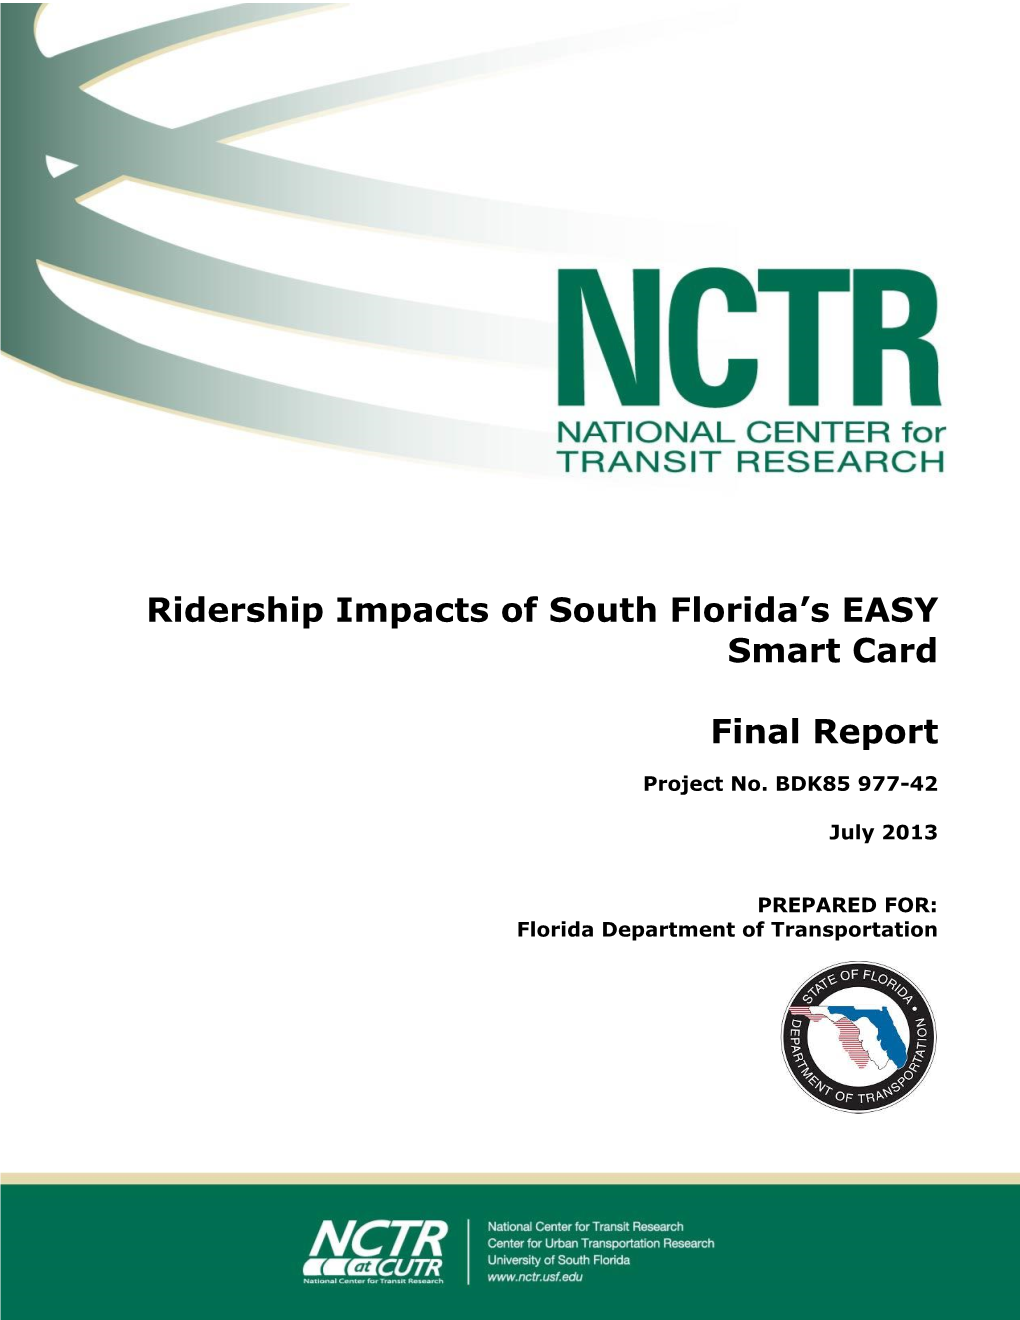 Ridership Impacts of South Florida's EASY Smart Card, Final Report